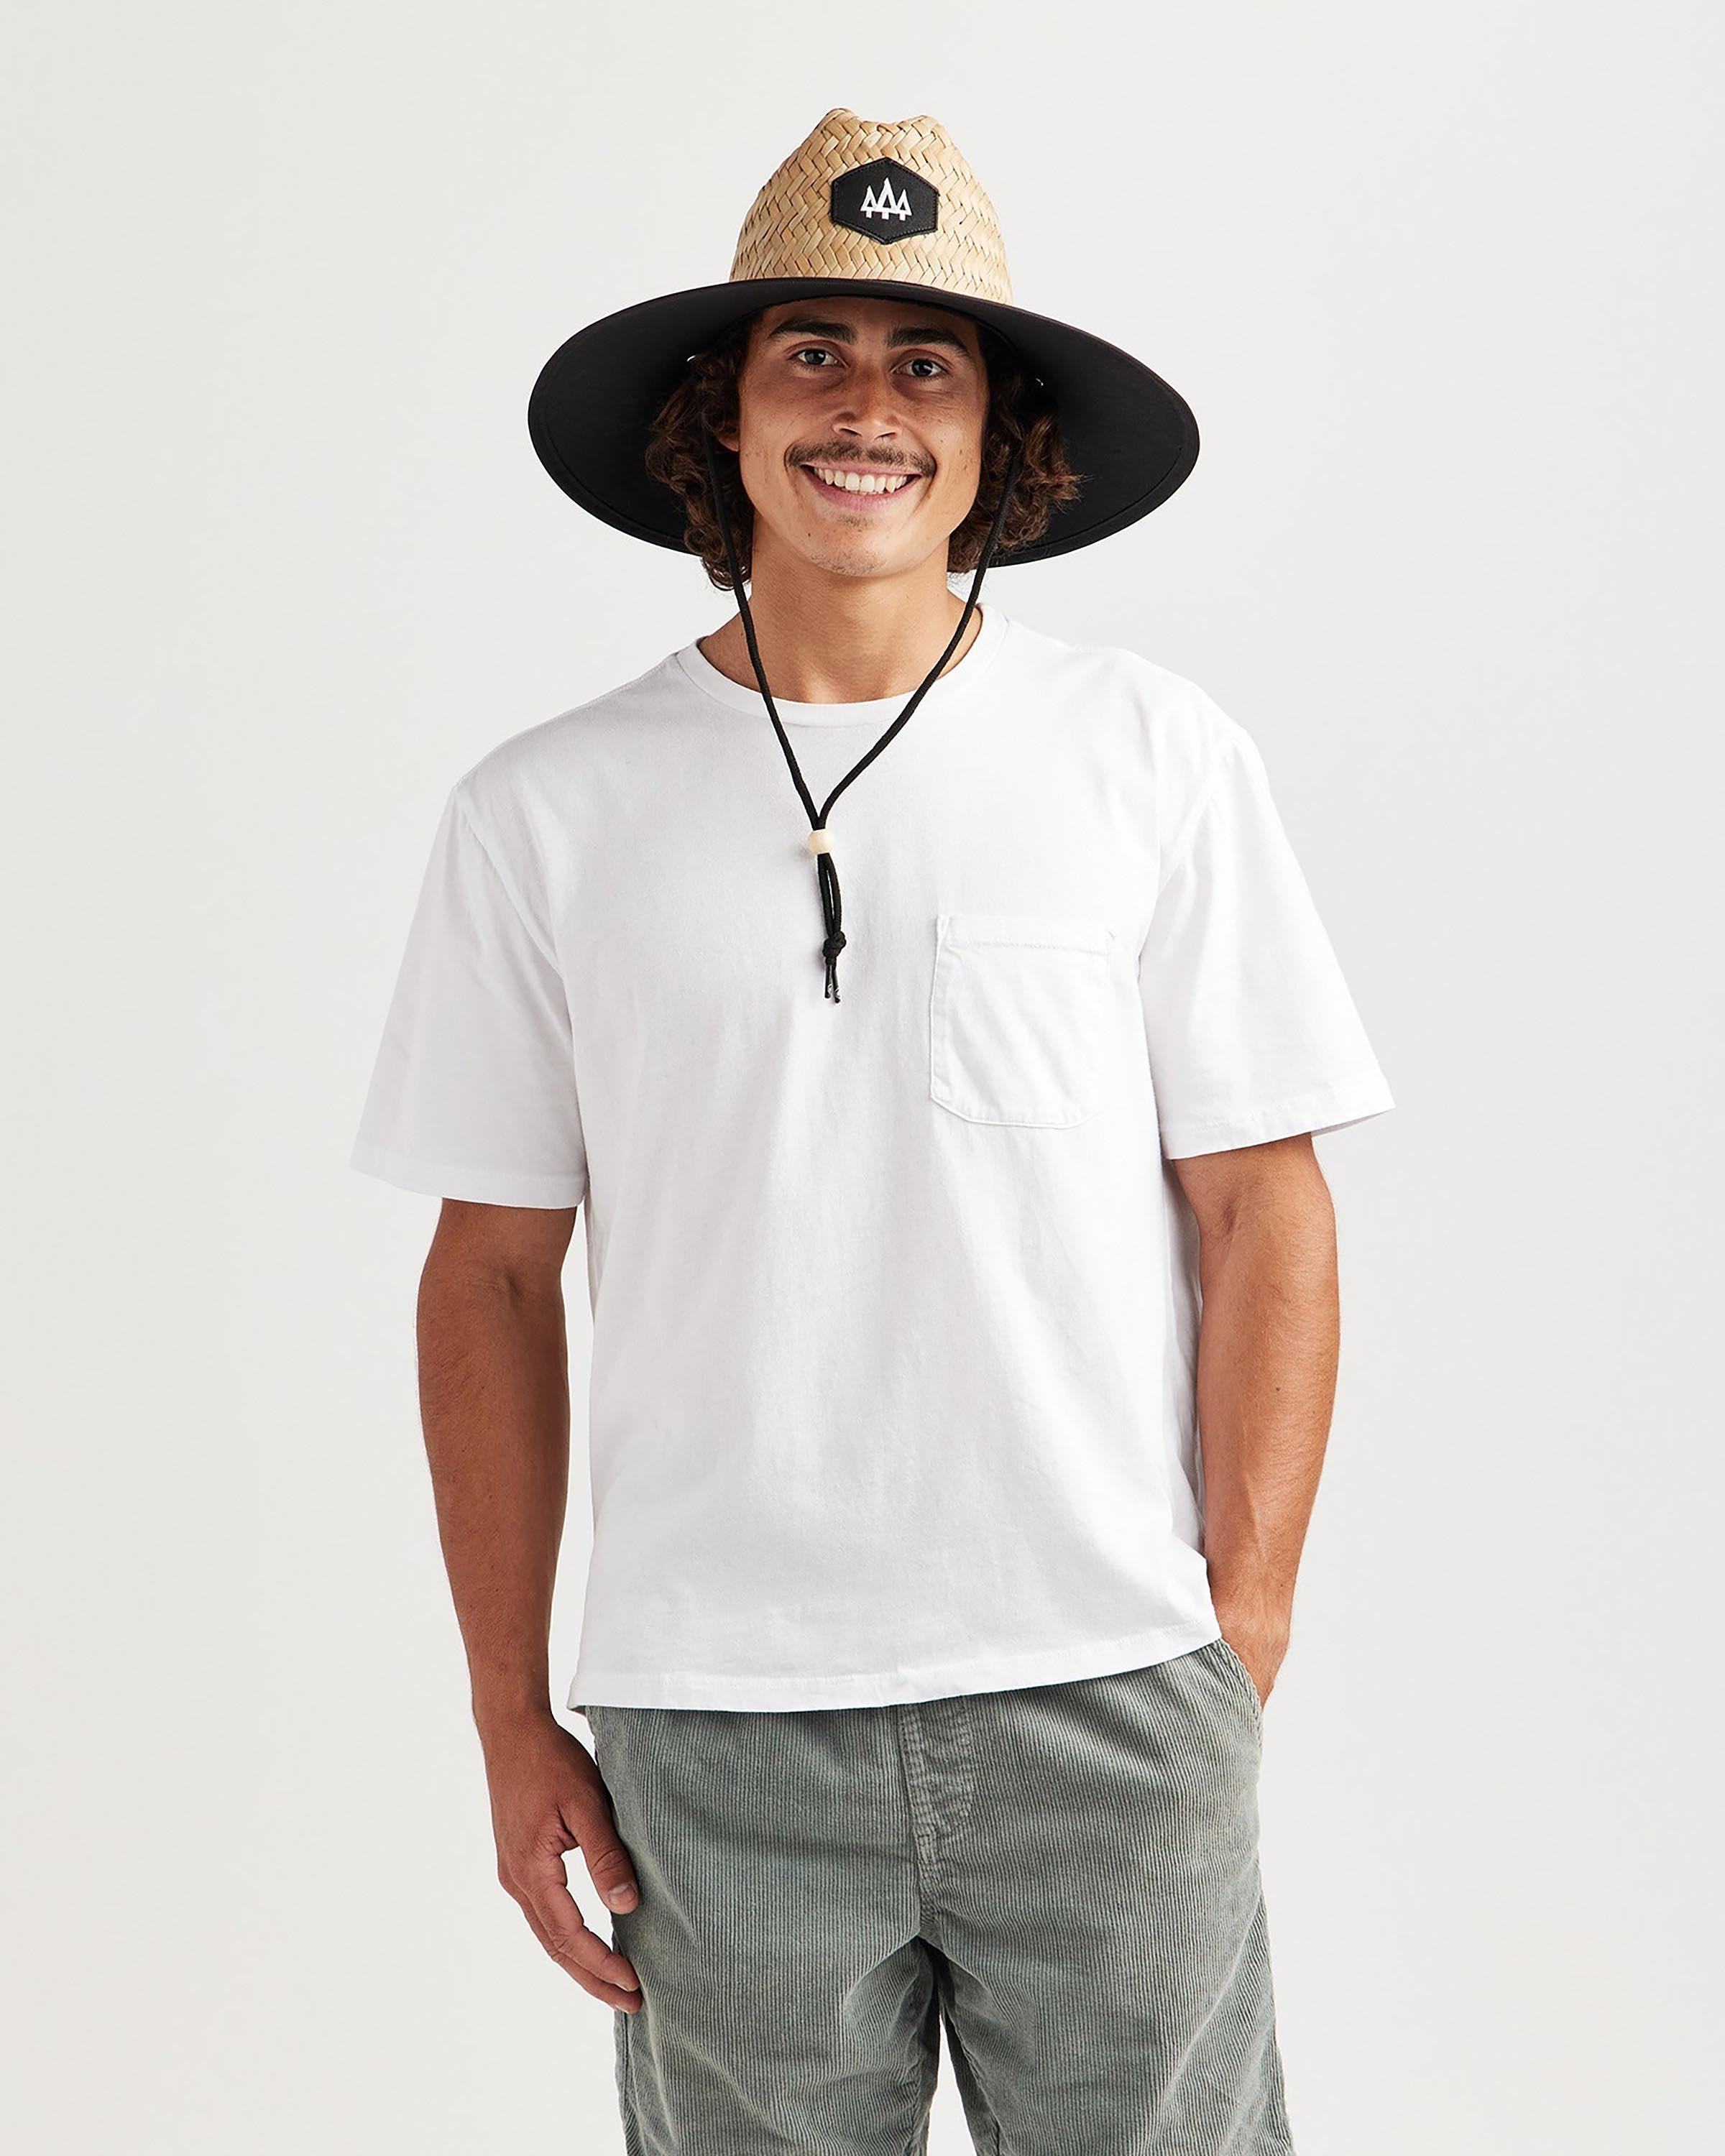 Blackout - undefined - Hemlock Hat Co. Lifeguards - Adults